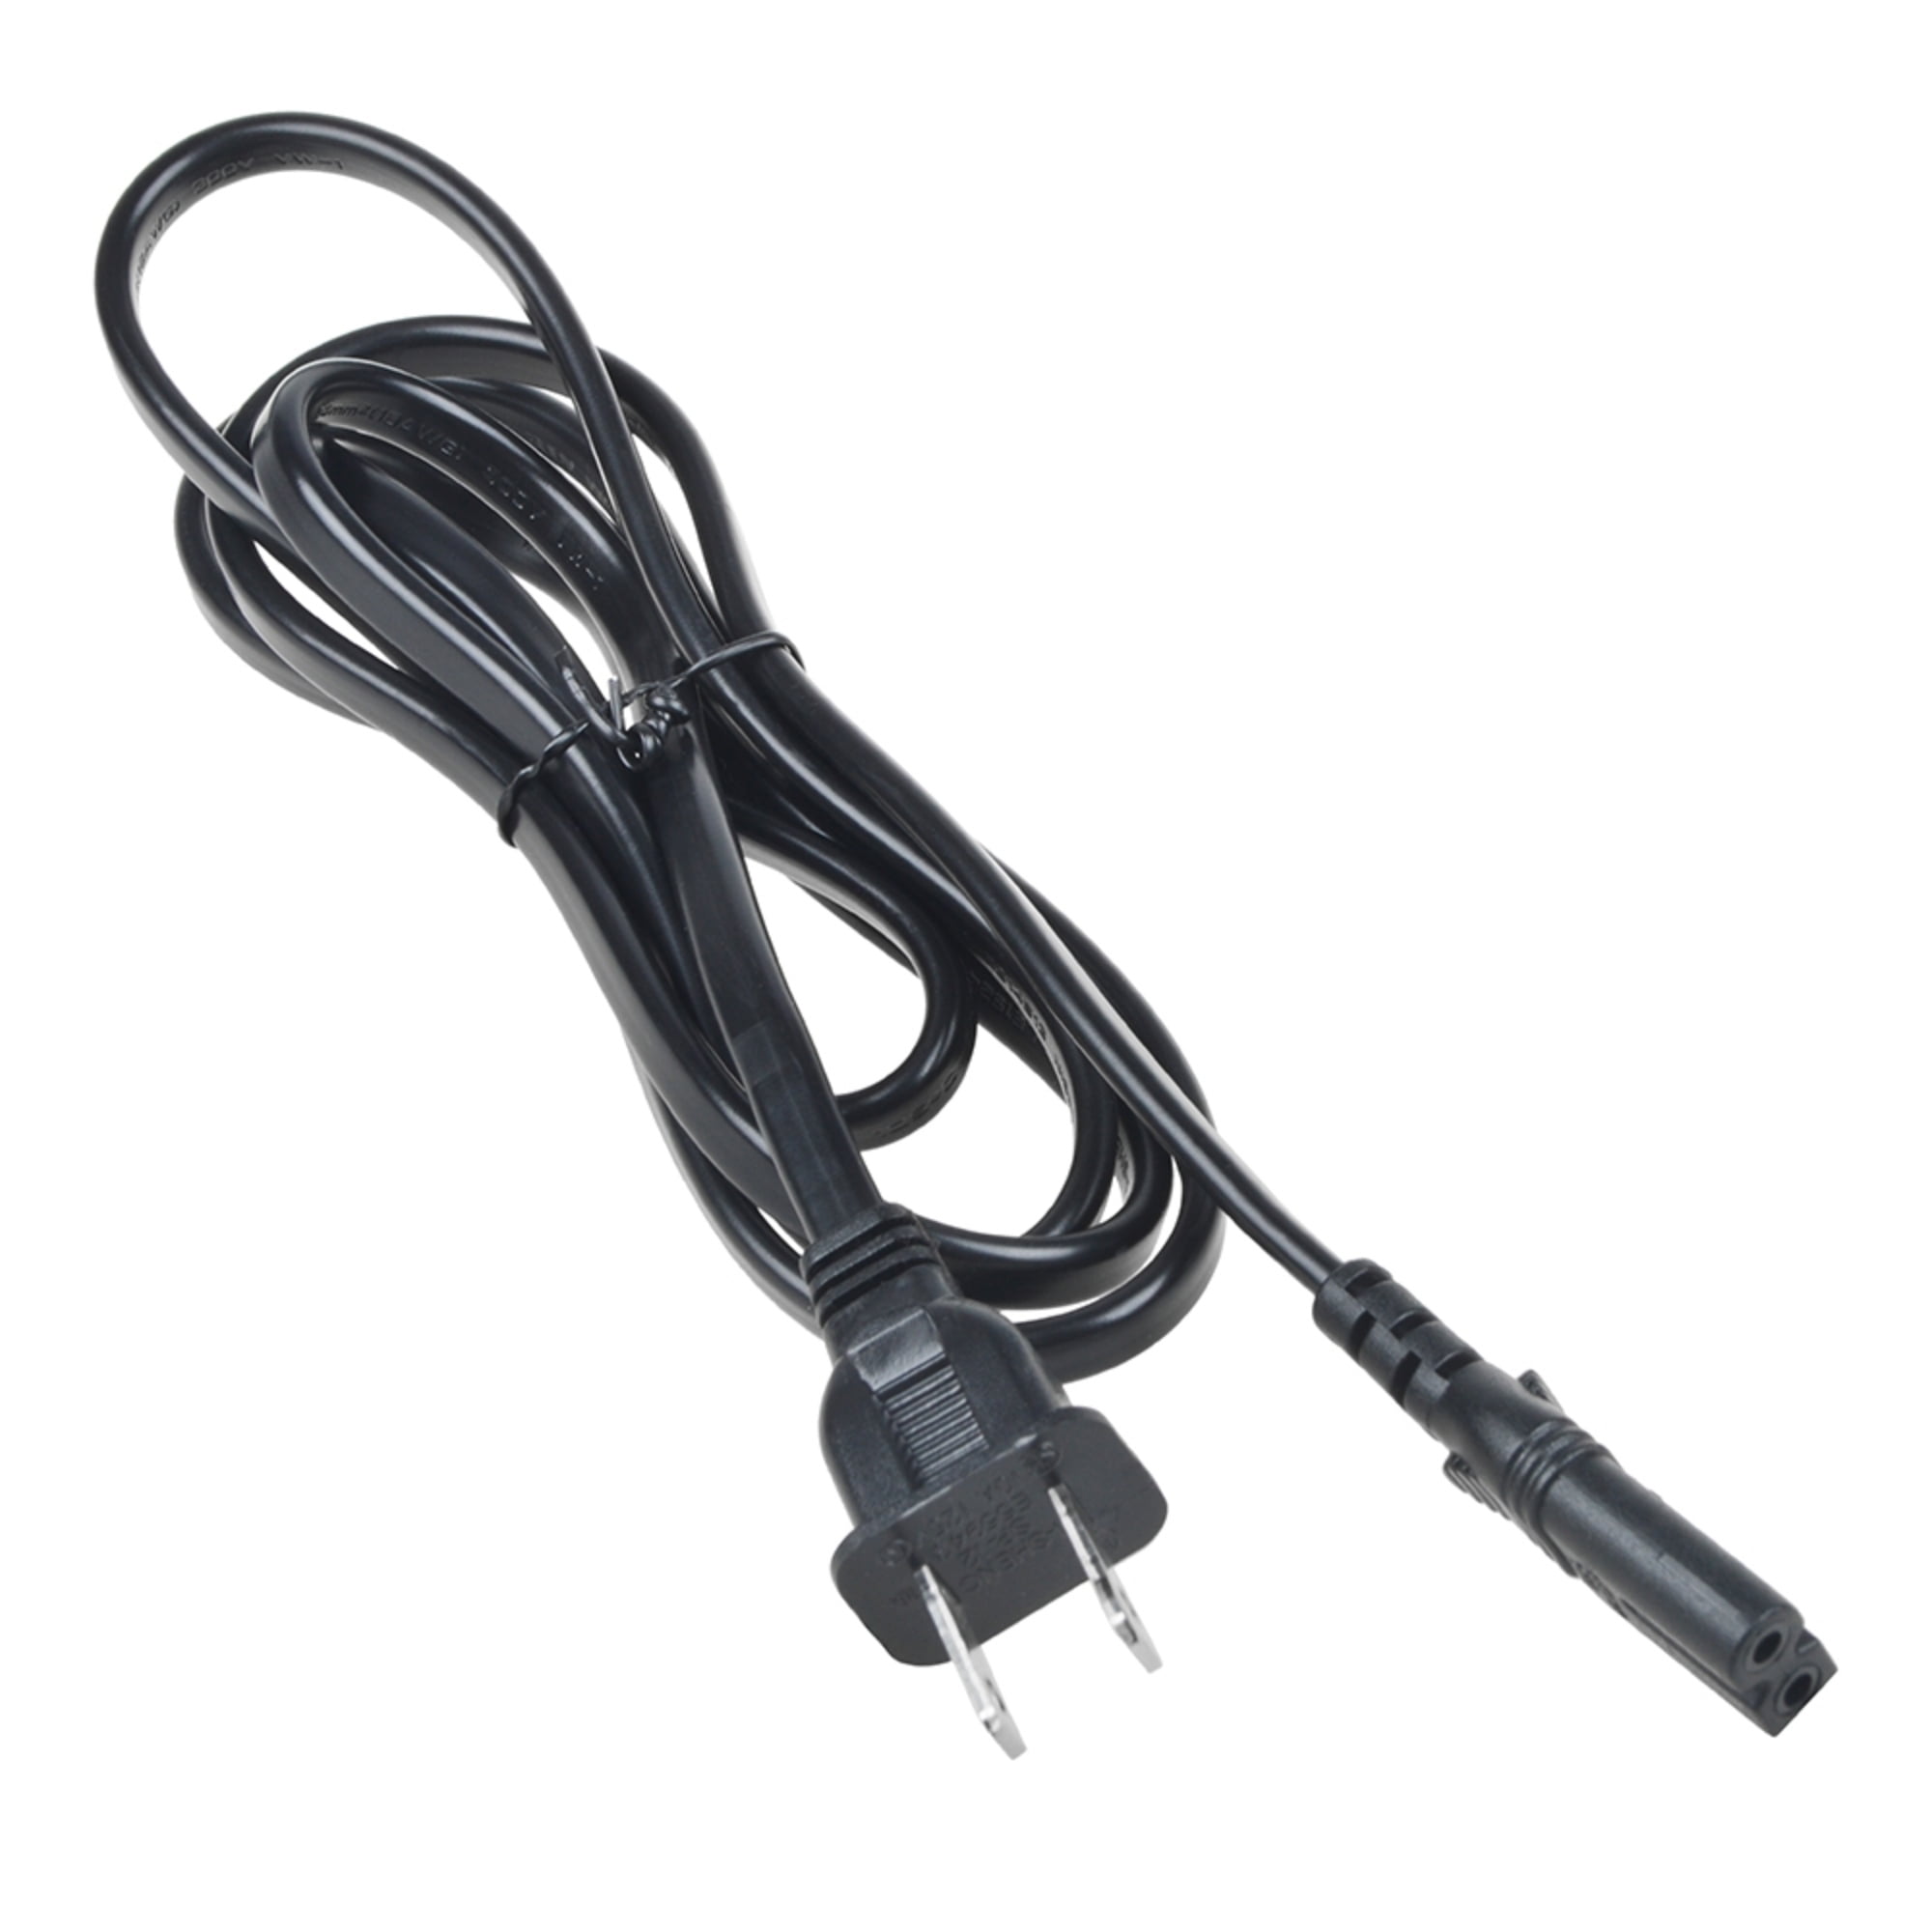 6ft AC Power Cord Cable for Roland RM-700 FP-1 DM-10 CM-30 KR-370 HP-237 MP-60 